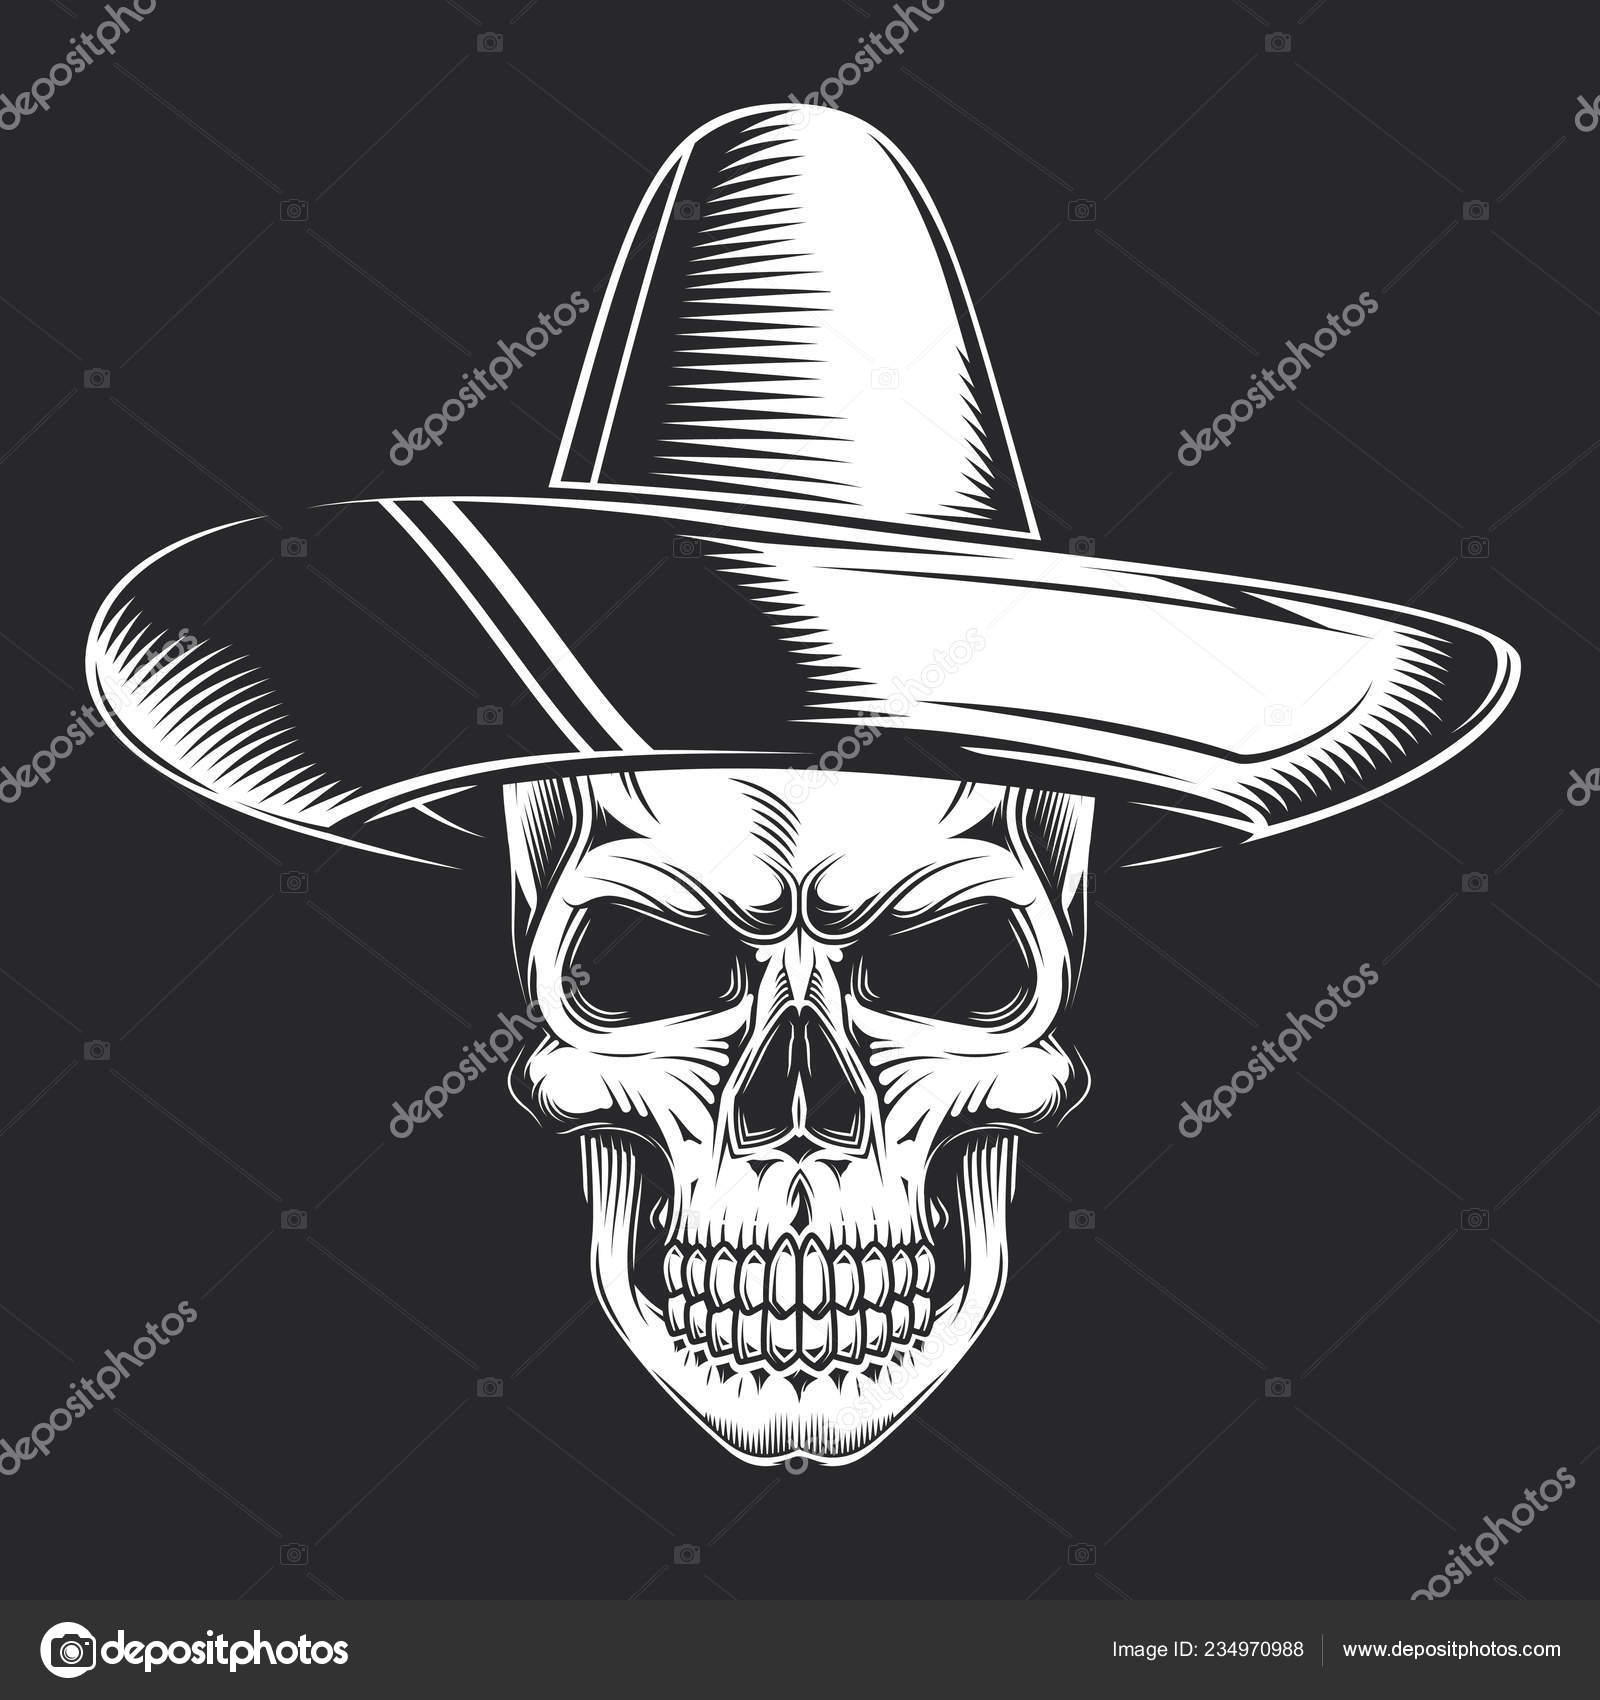 Mexican bandit skull in sombrero vector emblem Skull in sombrero hat  emblem label print or logo mexican bandit with two  CanStock